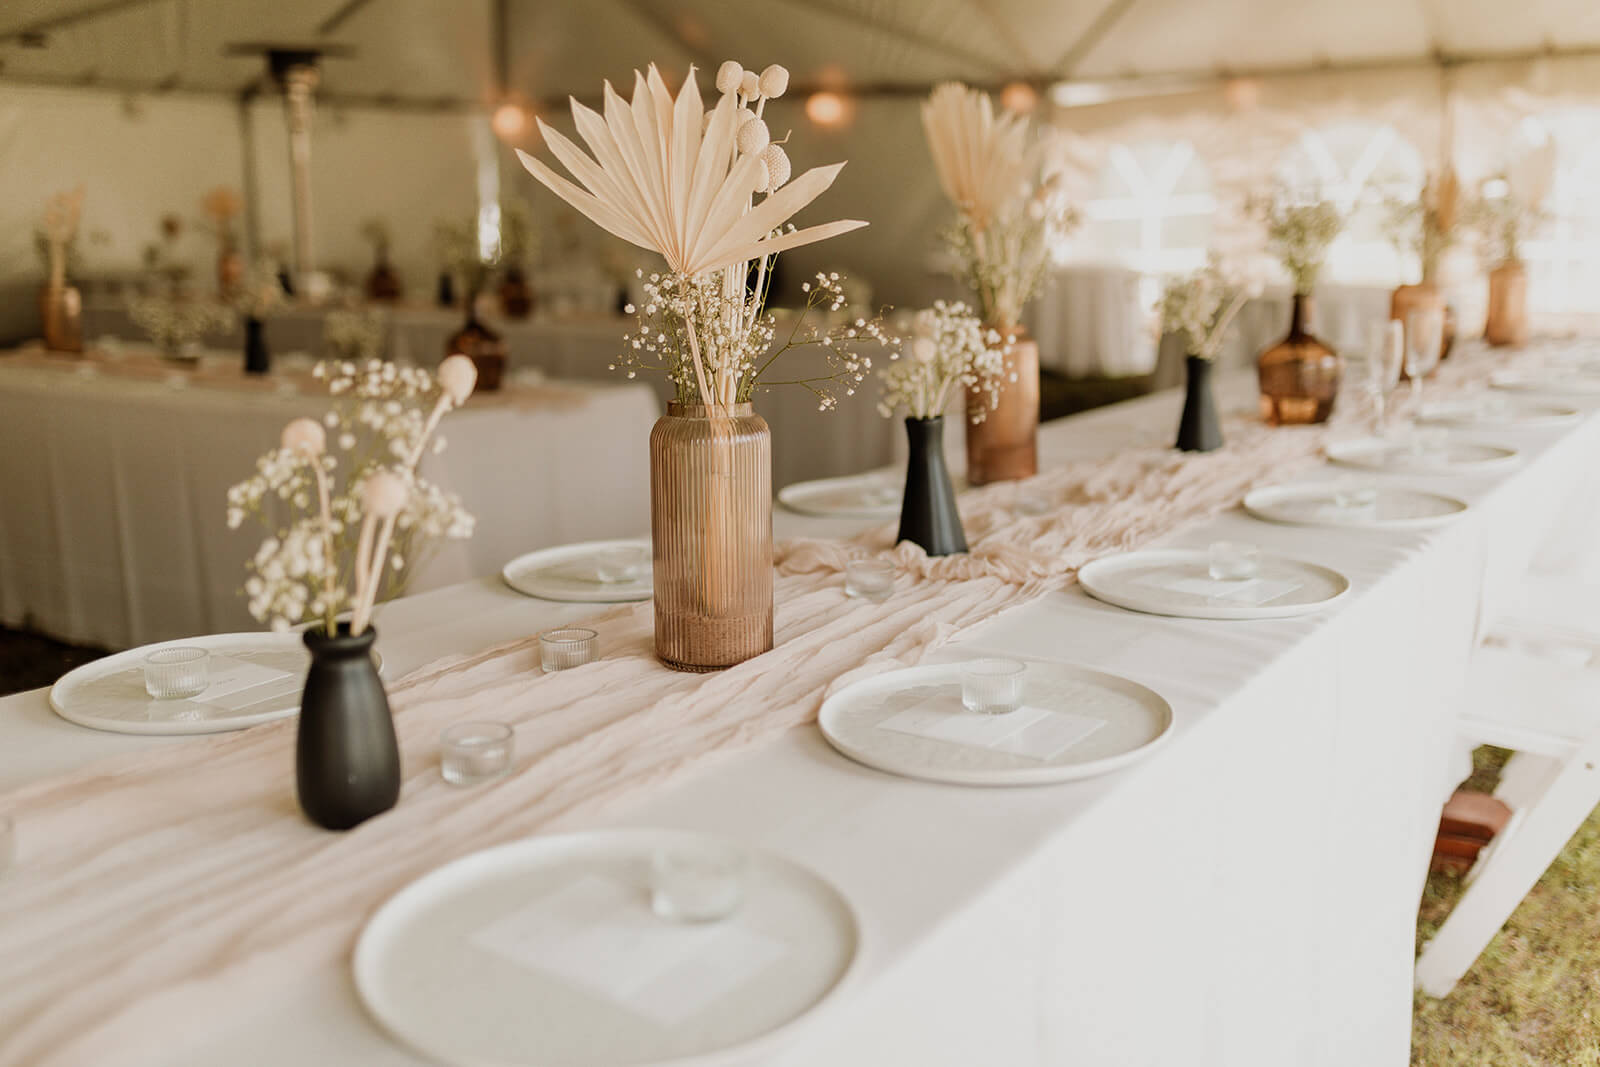 A monochromatic table setting with wooden vases and pale florals under a tented venue, creating an elegant atmosphere.